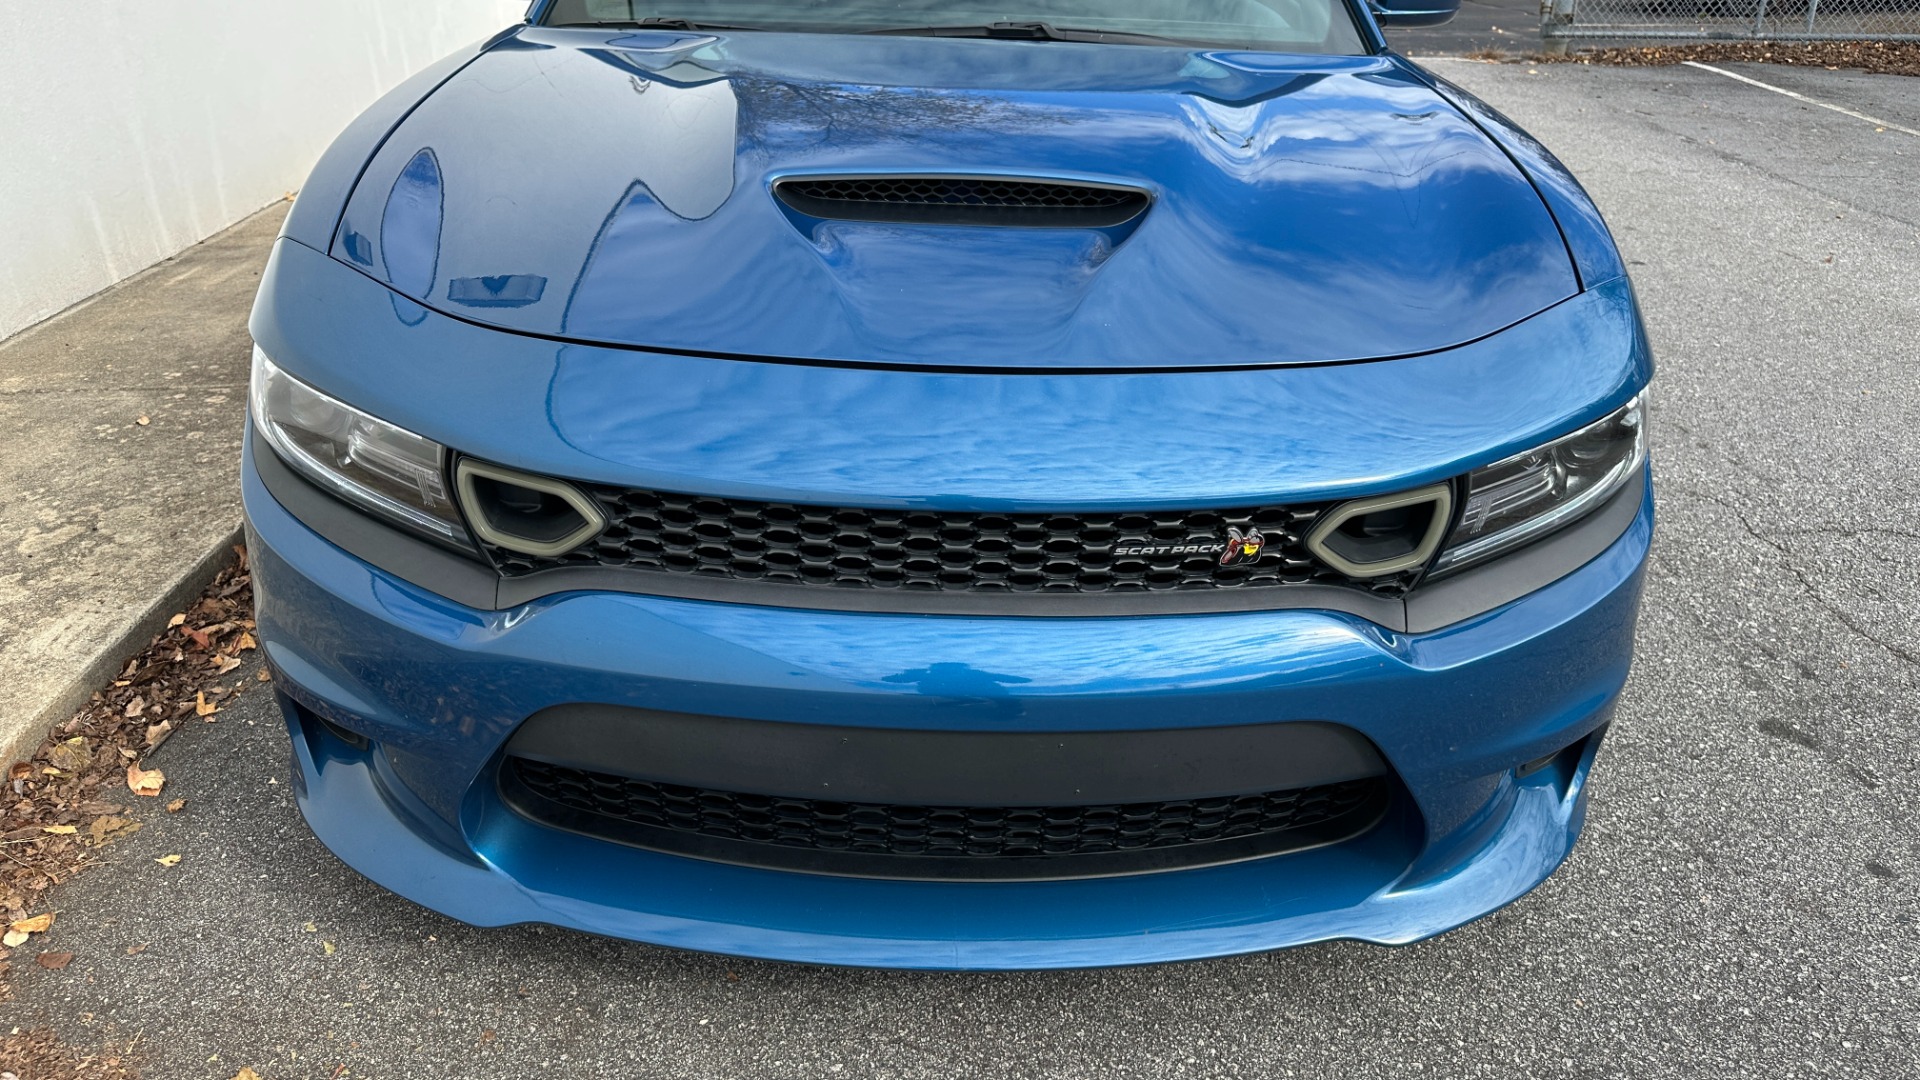 Used 2020 Dodge Charger SCATPACK / PLUS GROUP / POWER SUNROOF / BLIND SPOT / VENTILATED SEATING for sale $46,495 at Formula Imports in Charlotte NC 28227 8